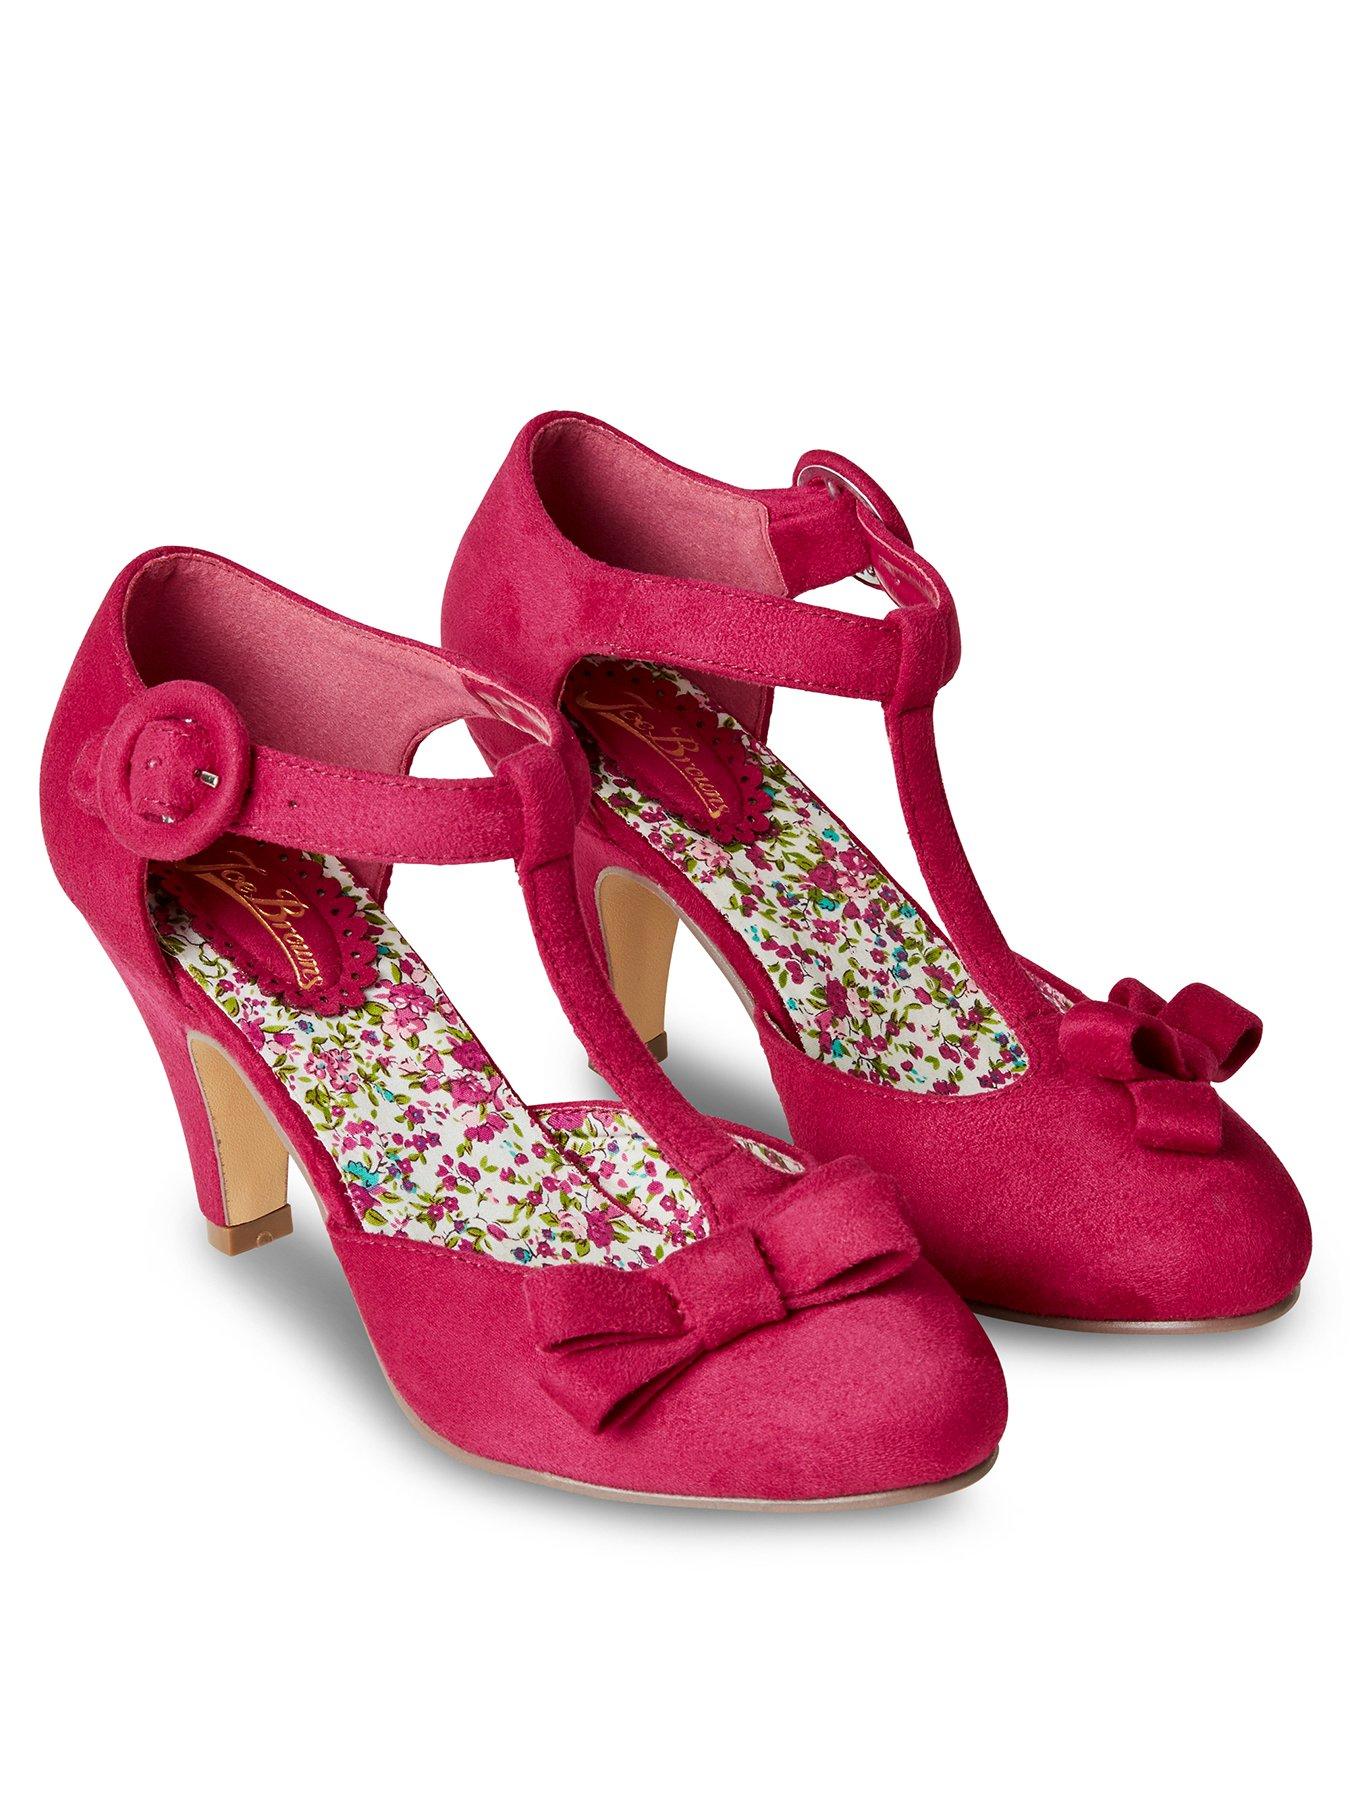 womens shoes pink heels